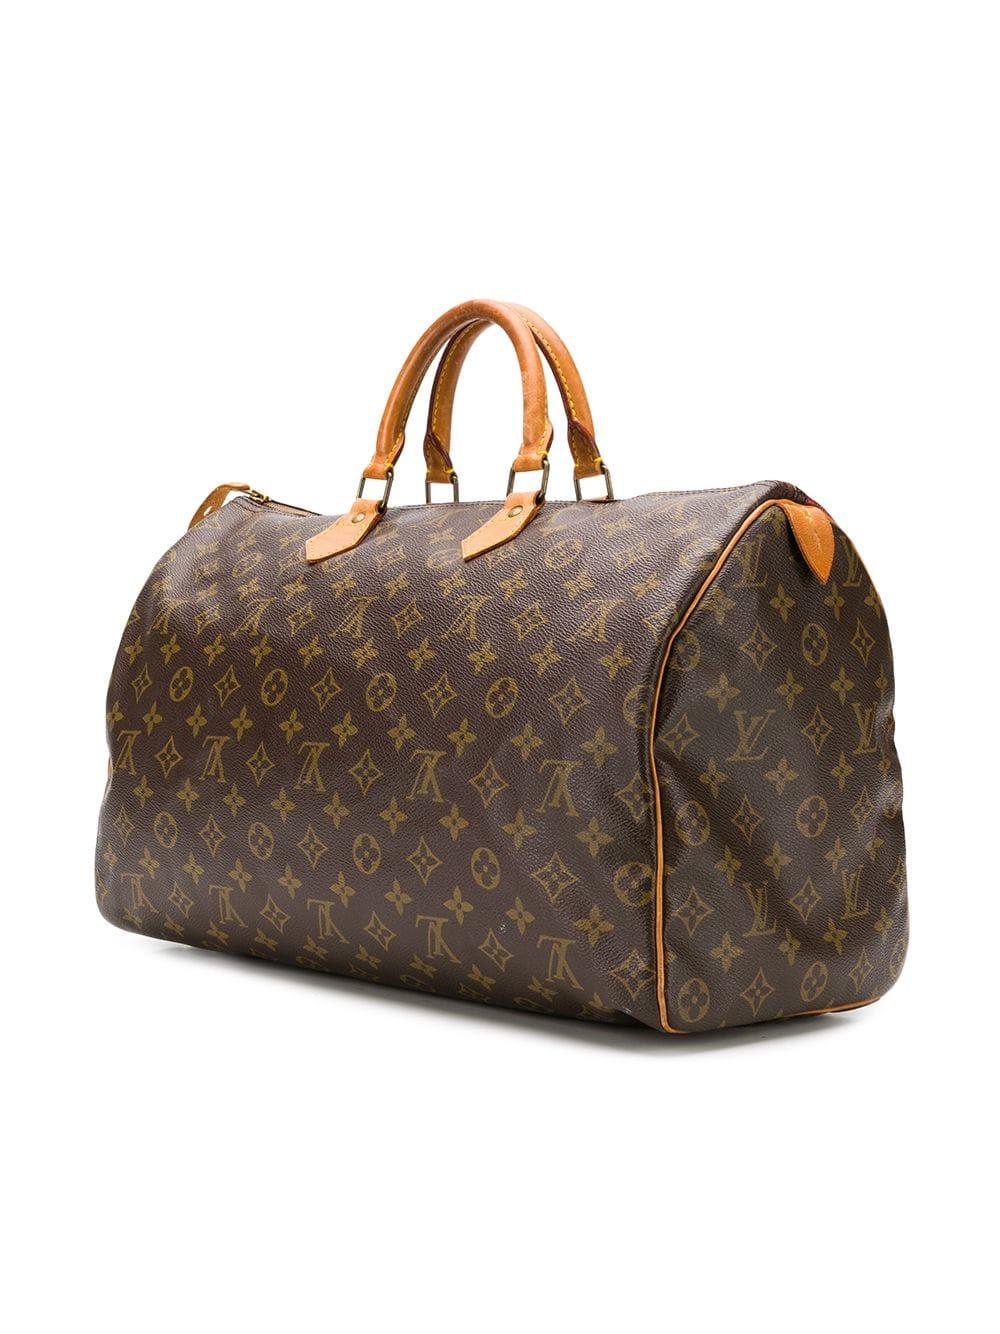 This hand-painted Louis Vuitton 'Japanese Wave' Keepall bag from Rewind's Emotional Baggage collection, where iconic handbags are specially customised with hand-painted illustrations is expertly crafted in monogram Canvas leather and accented by